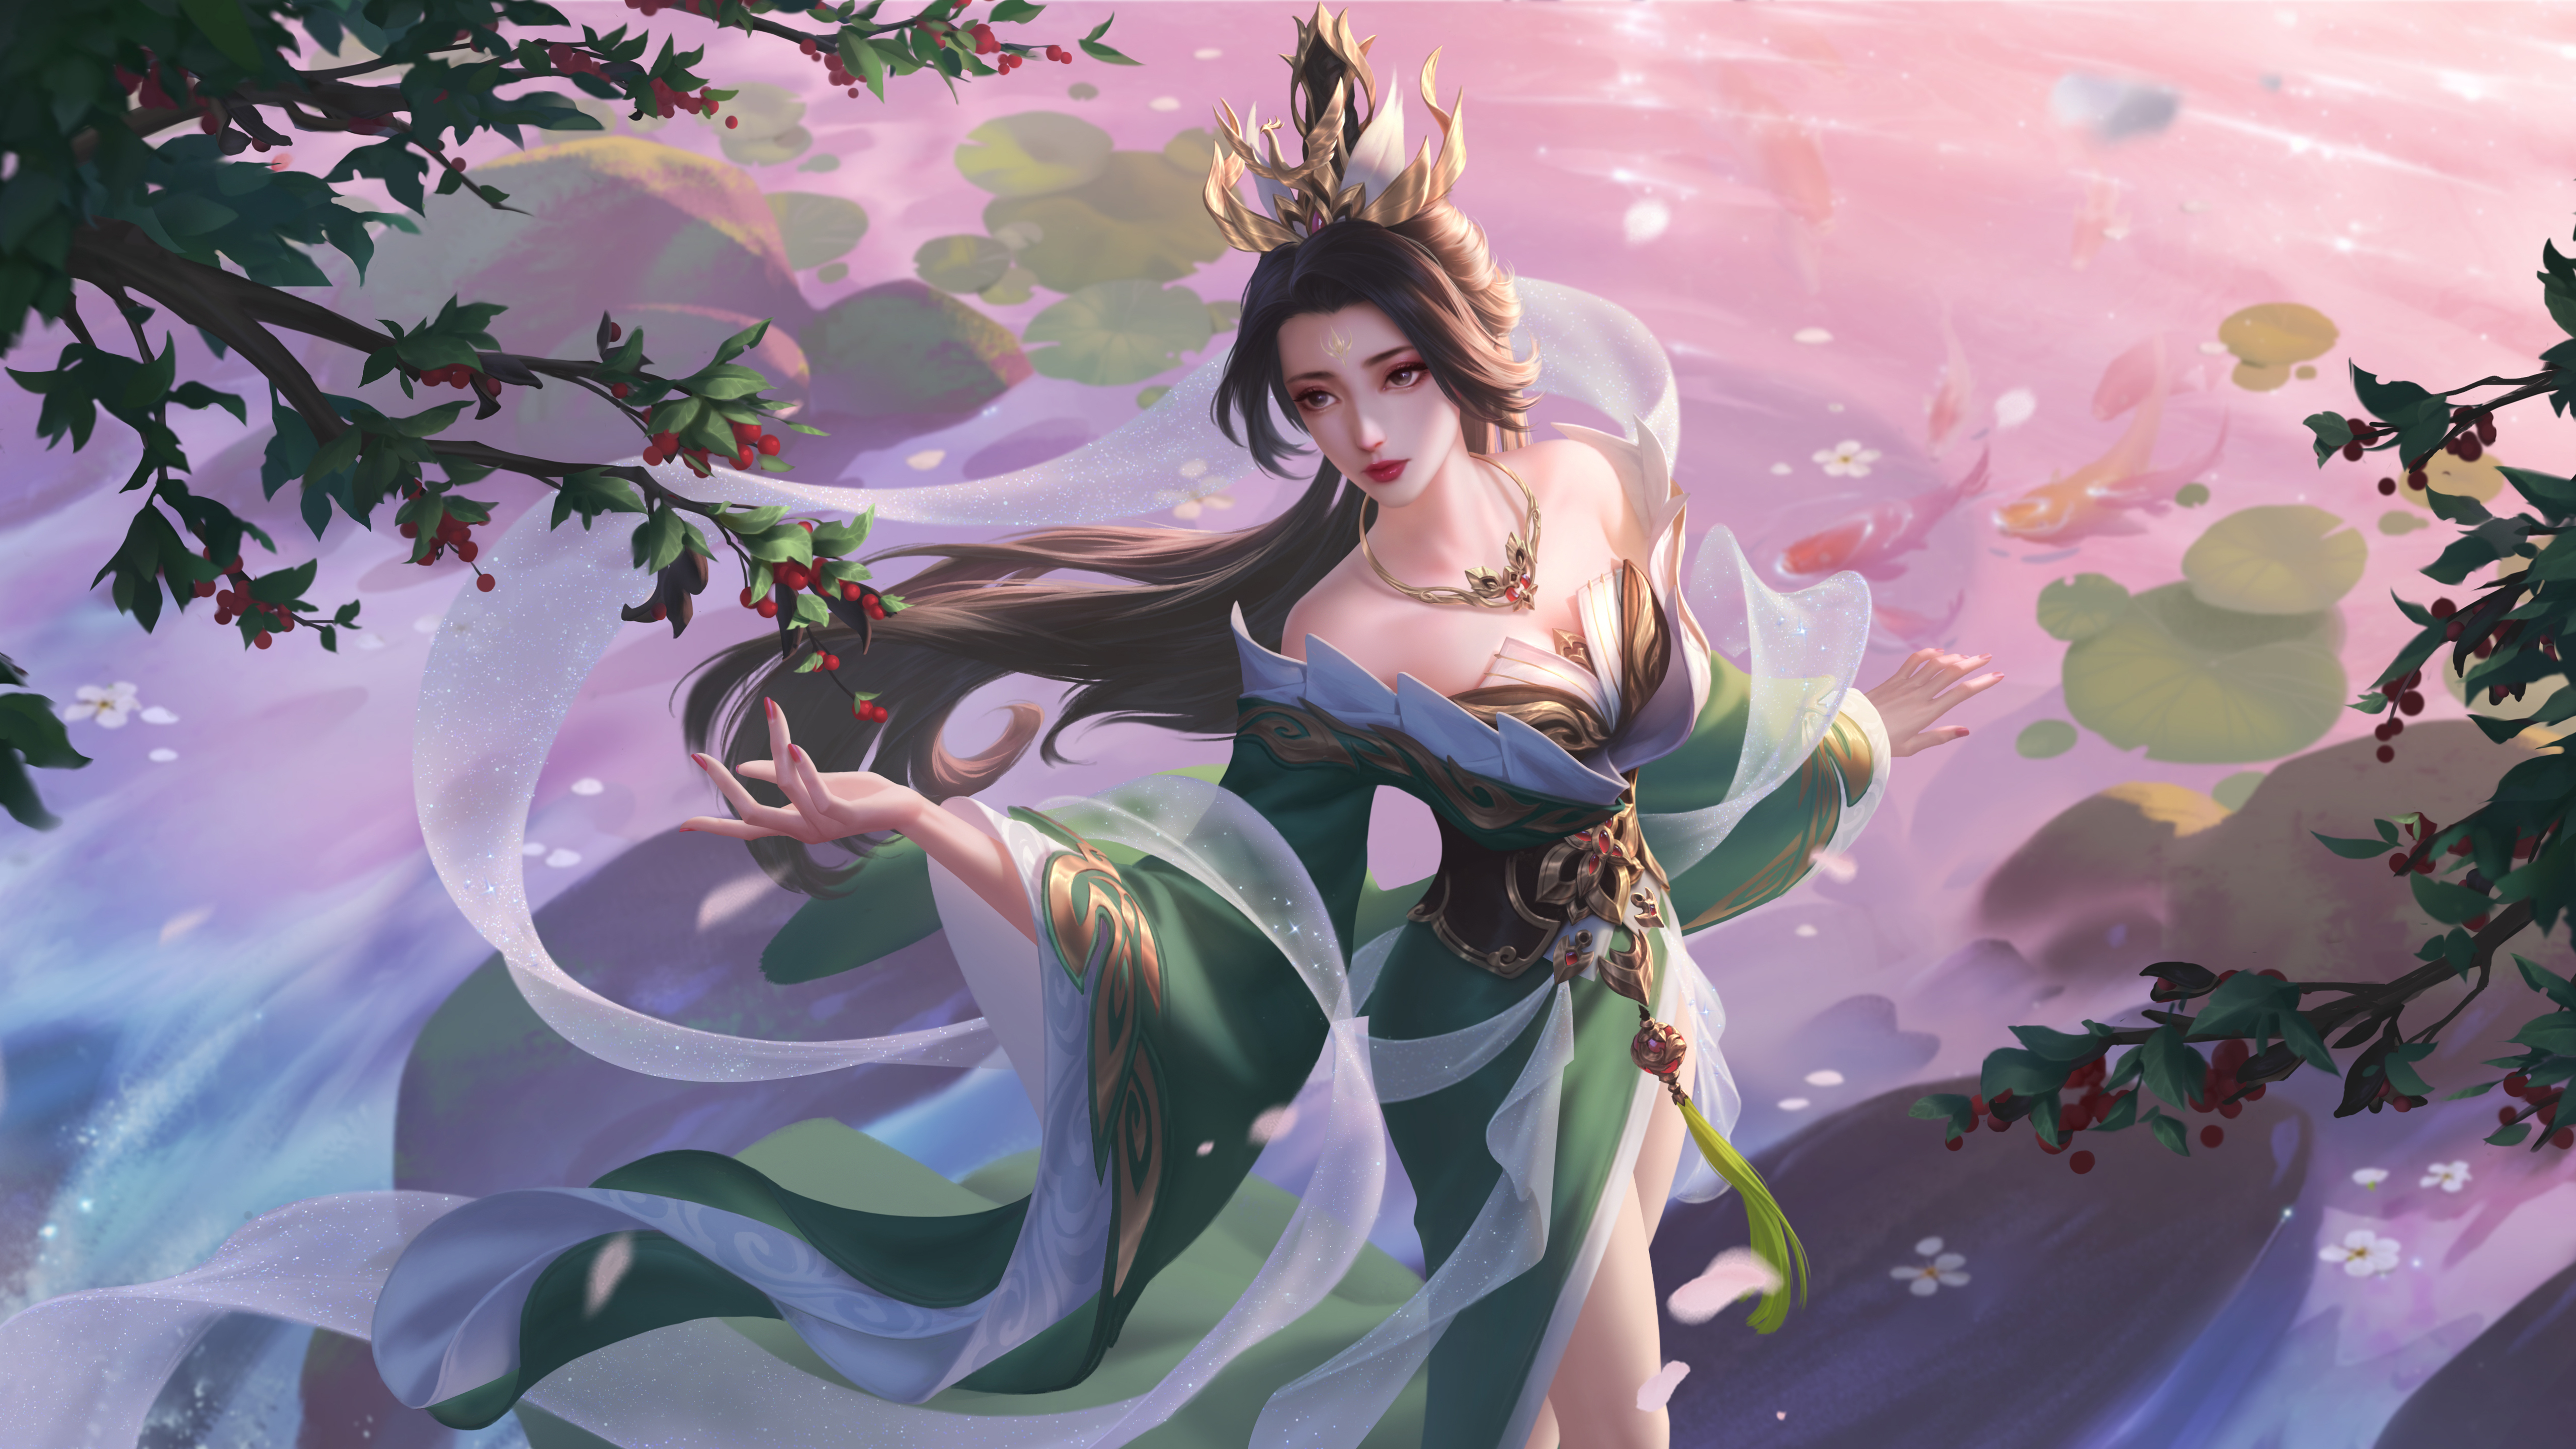 Video Game Characters Three Kingdoms Video Games Video Game Art Video Game Girls Petals Water Lily P 5120x2880